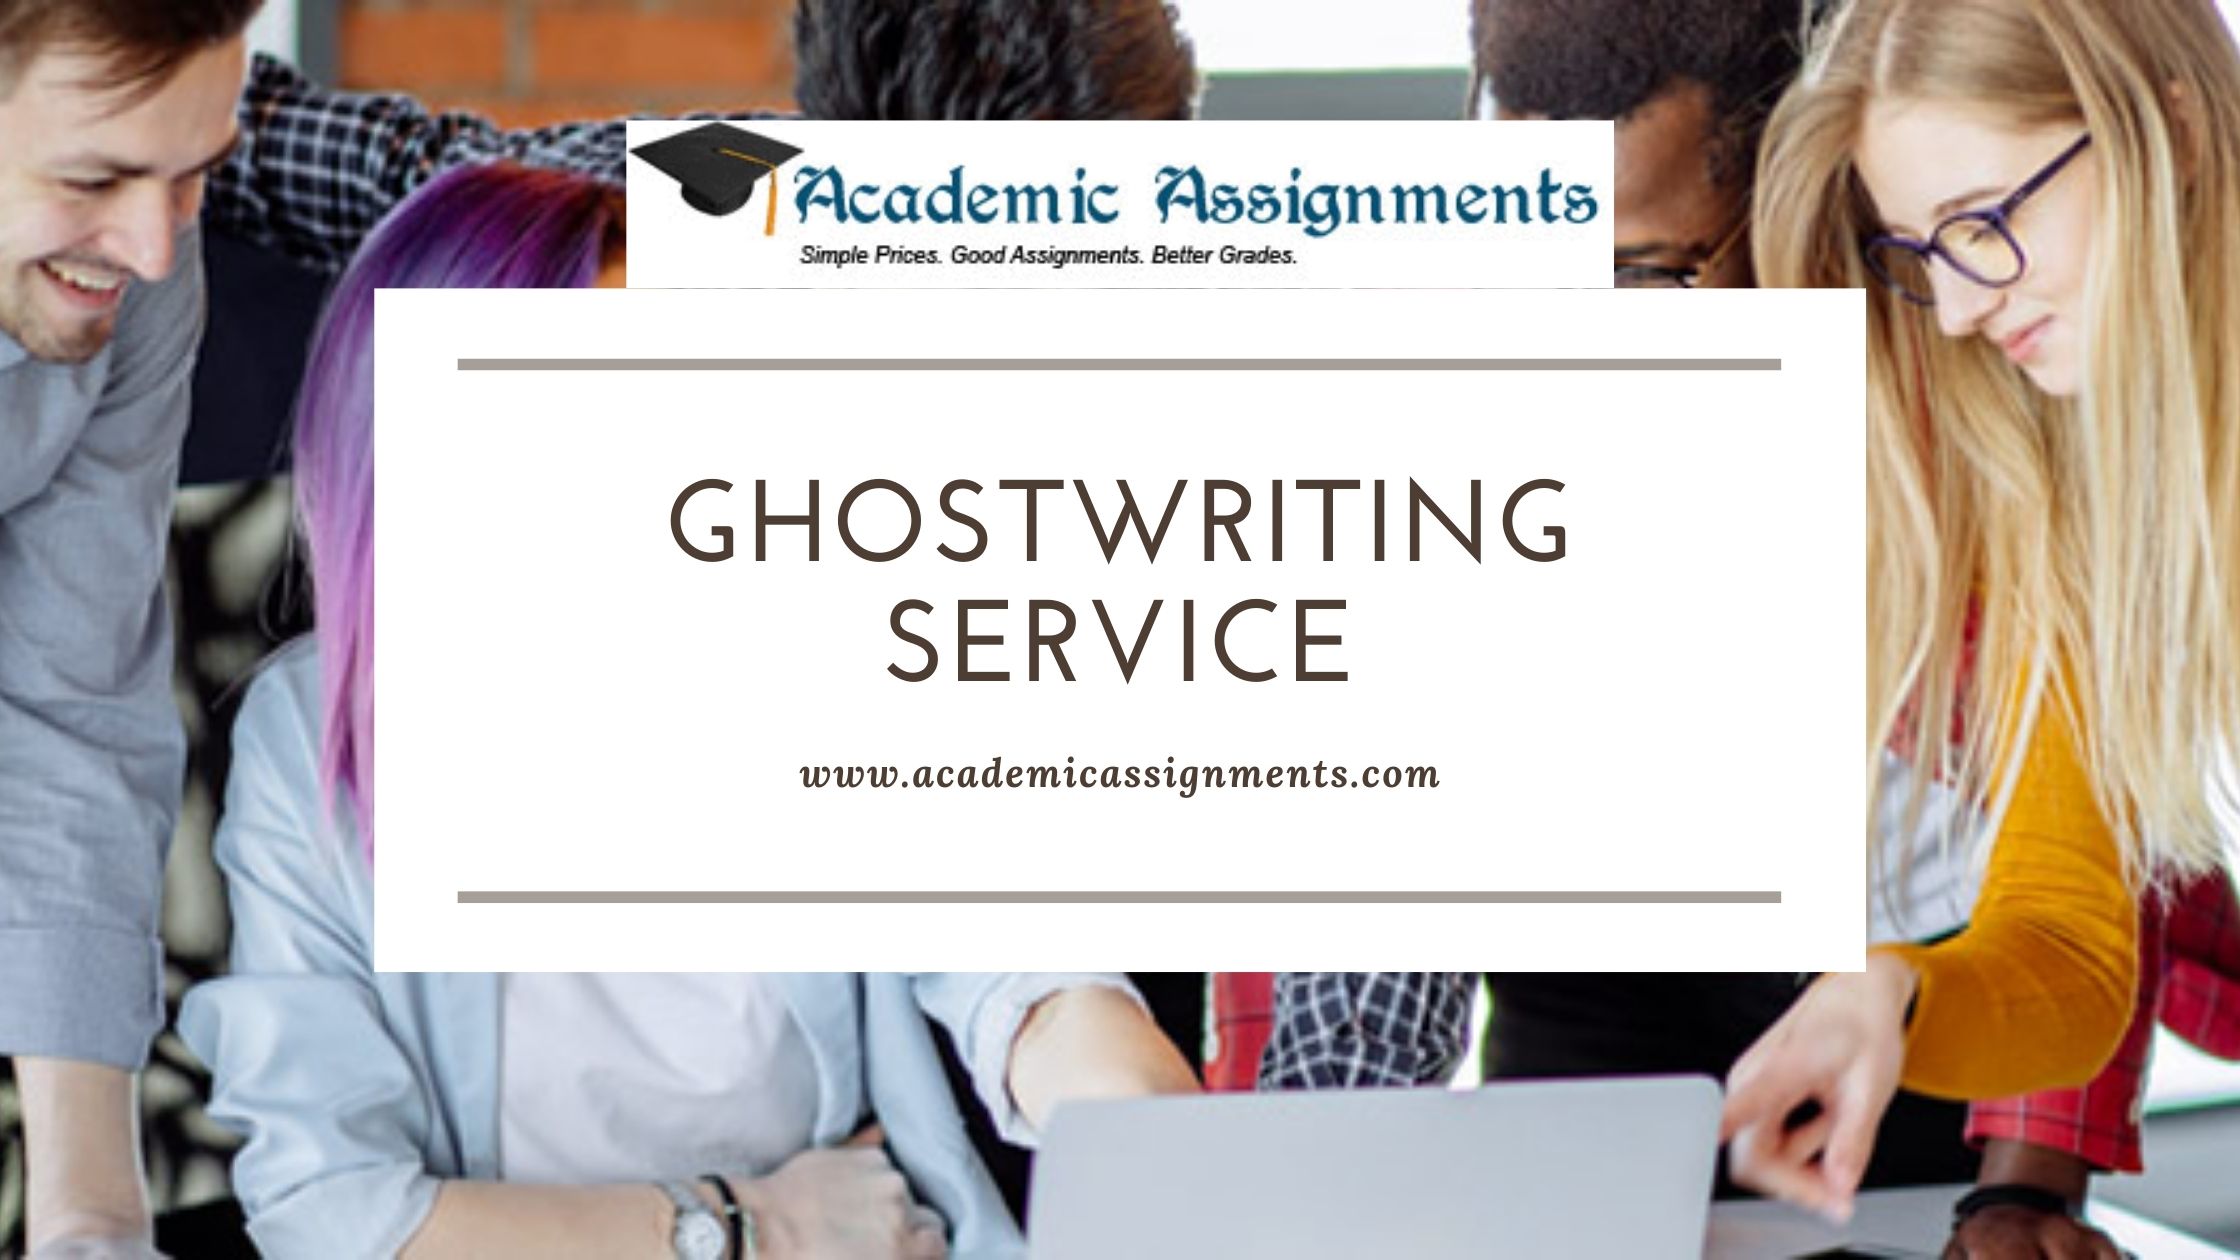 Get Ghost Writing Services Hire The Best GhostWriters in UK